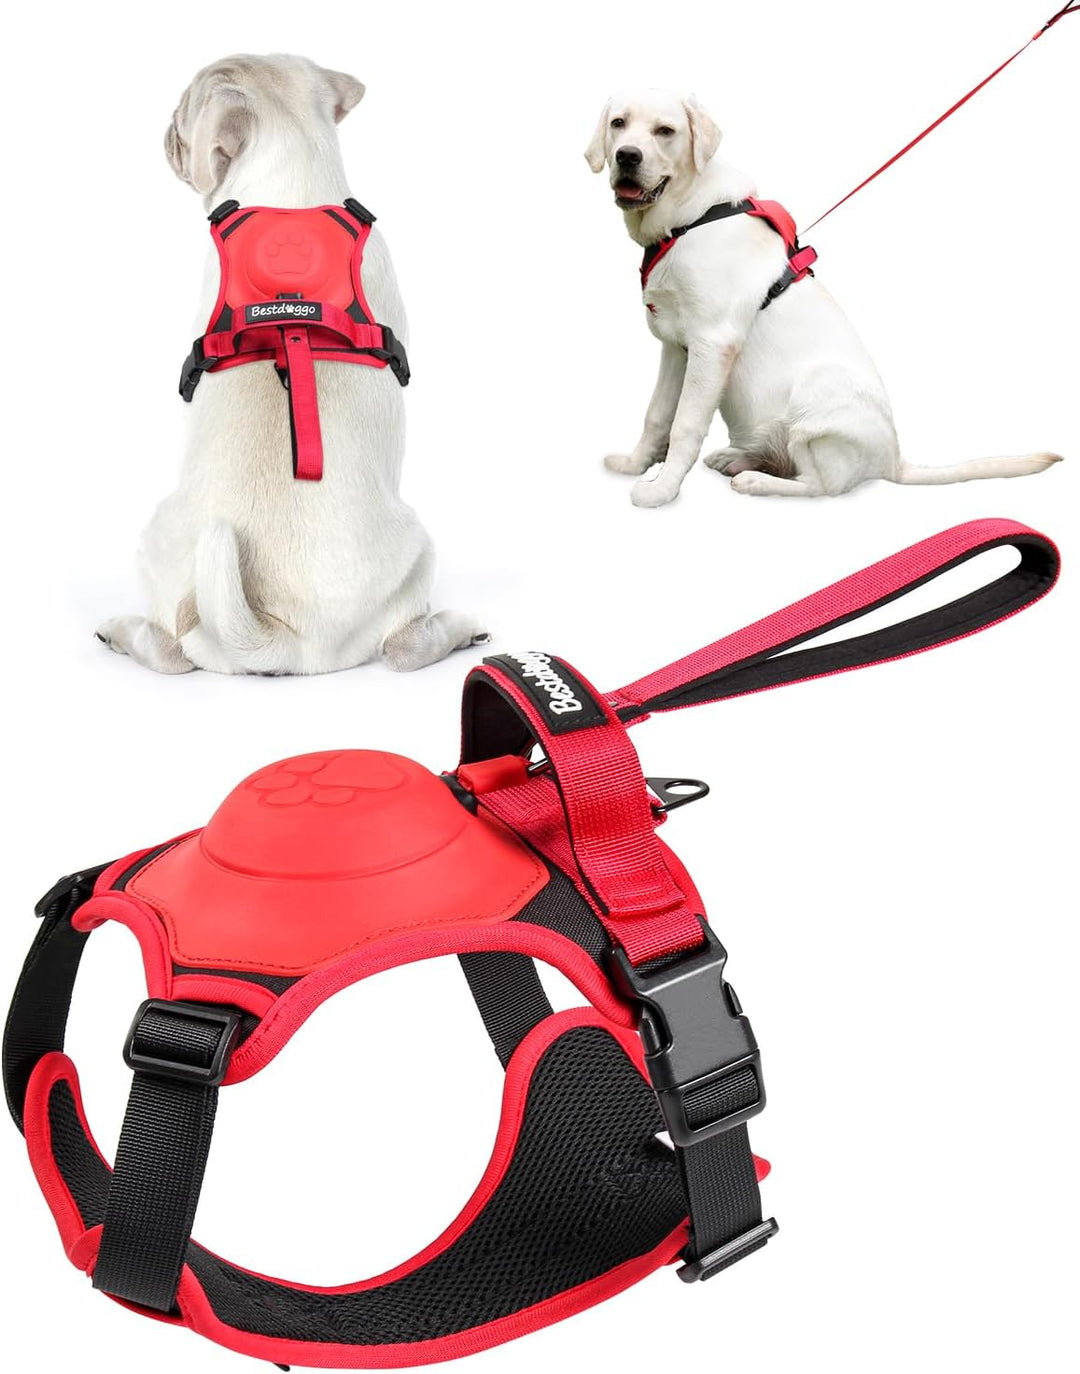 Dog Harness and Retractable Leash Set All-in-One🎅 Christmas For The Dog‘s Gift🎅-15